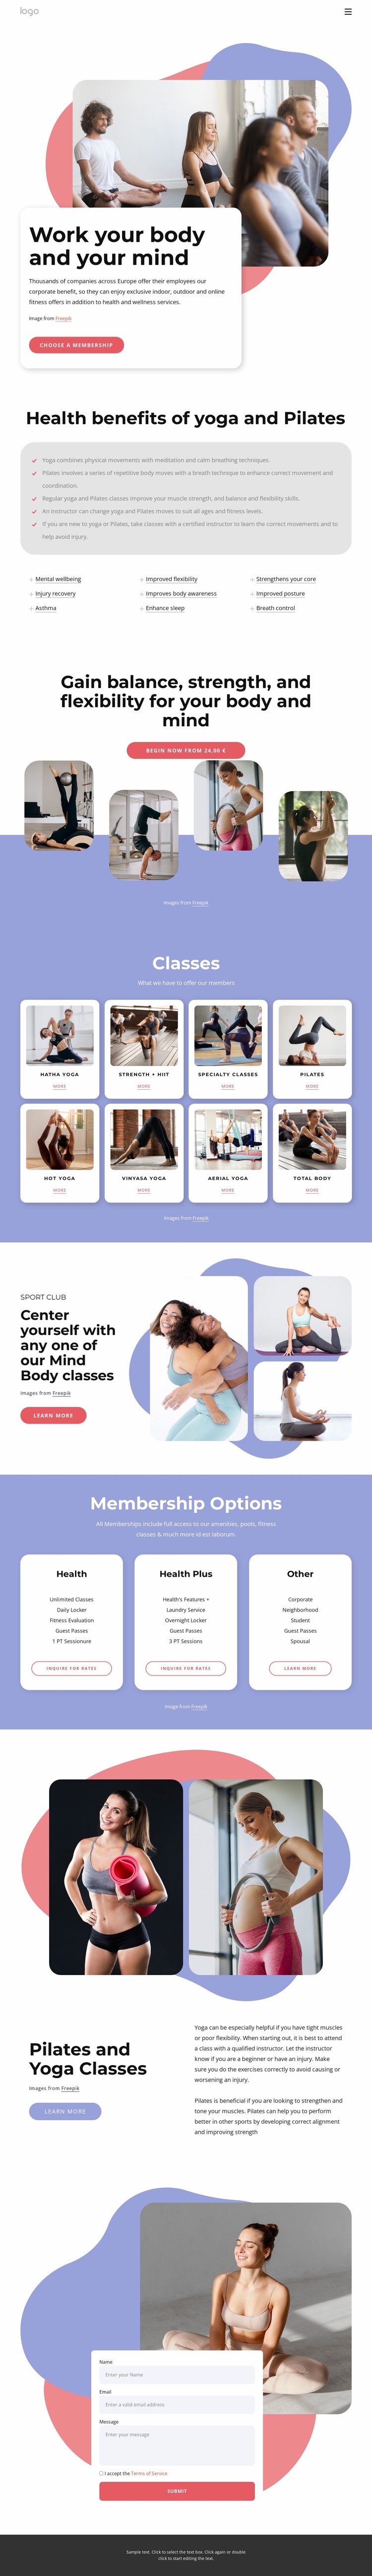 Pilates and yoga classes Landing Page